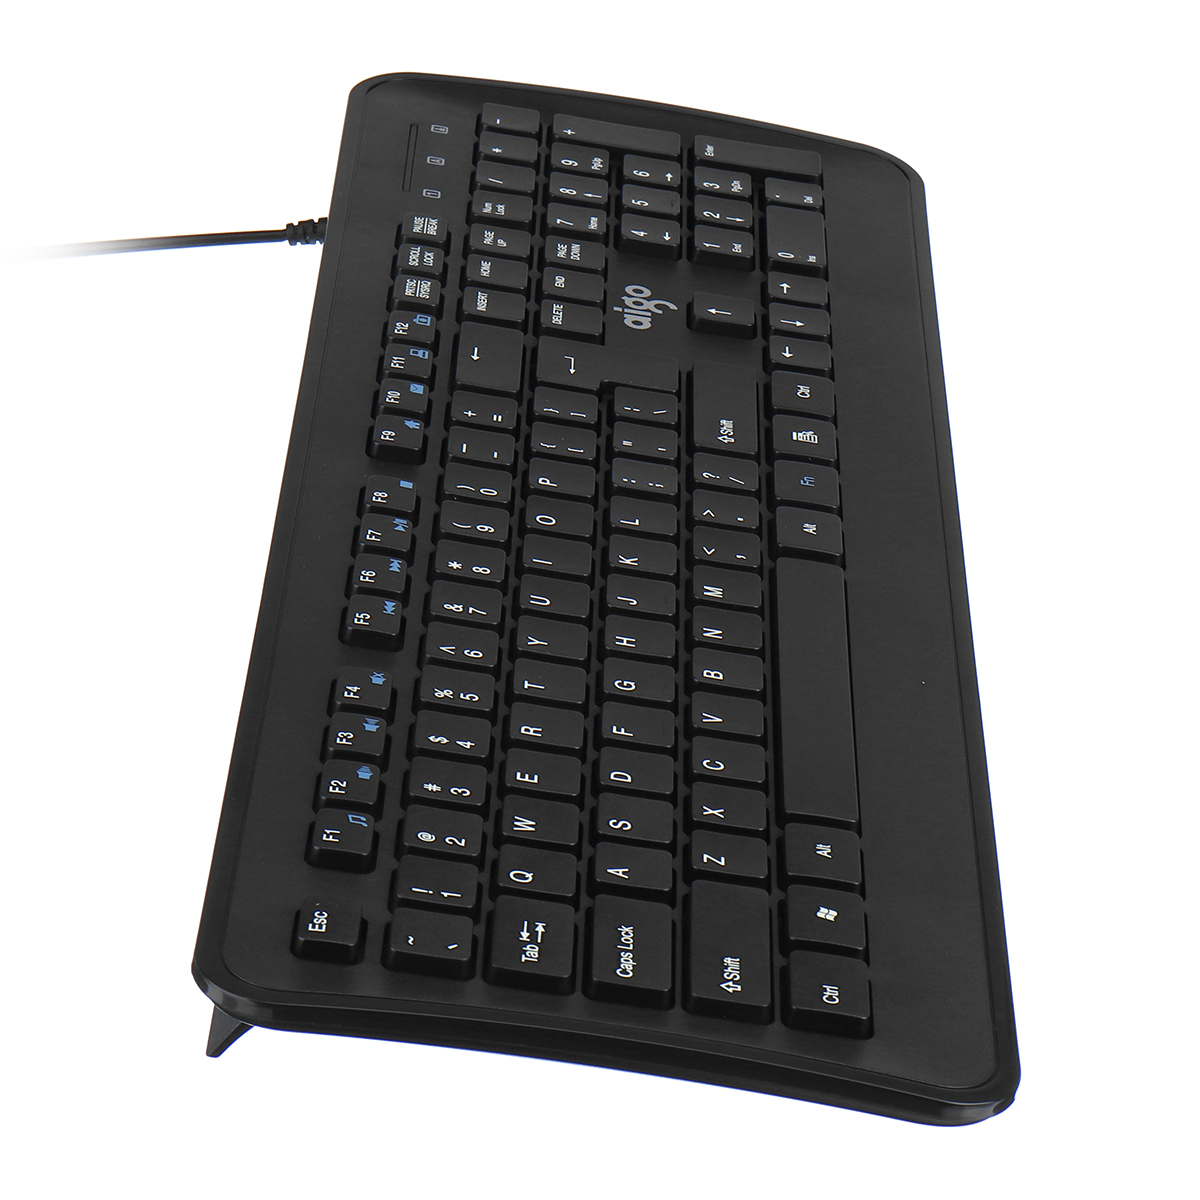 Find AIGO WQ640 Wired Keyboard Mouse Set 104 Keys Office Optical Keyboard 2400DPI Ergonomic Mouse Kit for Keyboard Laptop PC for Sale on Gipsybee.com with cryptocurrencies